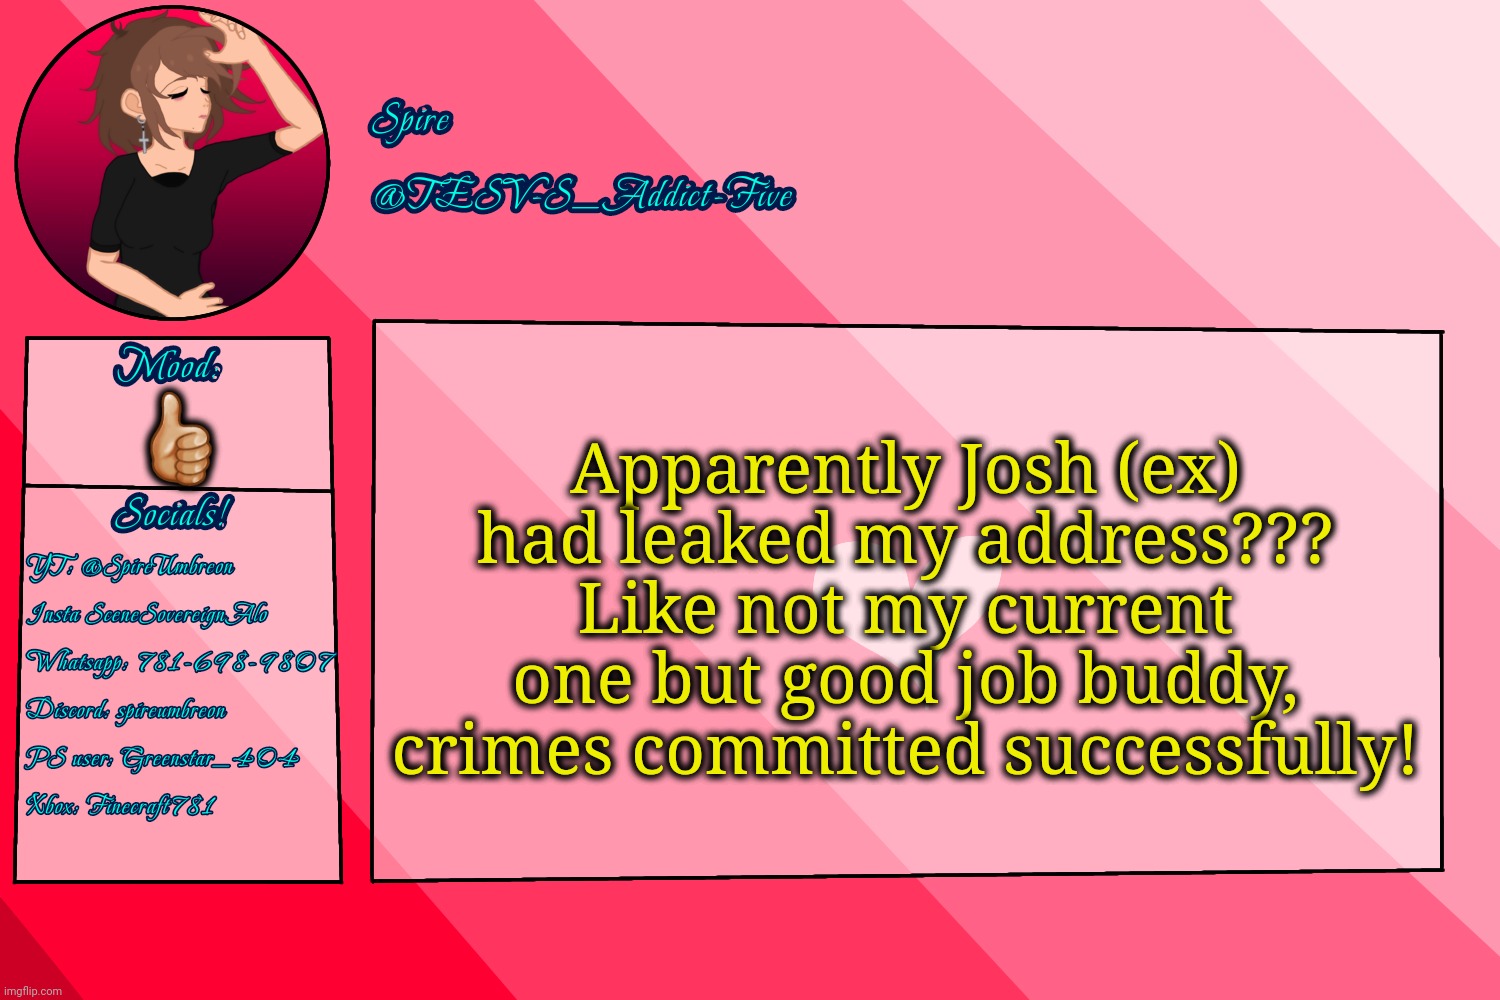 . | Apparently Josh (ex) had leaked my address??? Like not my current one but good job buddy, crimes committed successfully! 👍🏼 | image tagged in tesv-s_addict-five announcement template | made w/ Imgflip meme maker